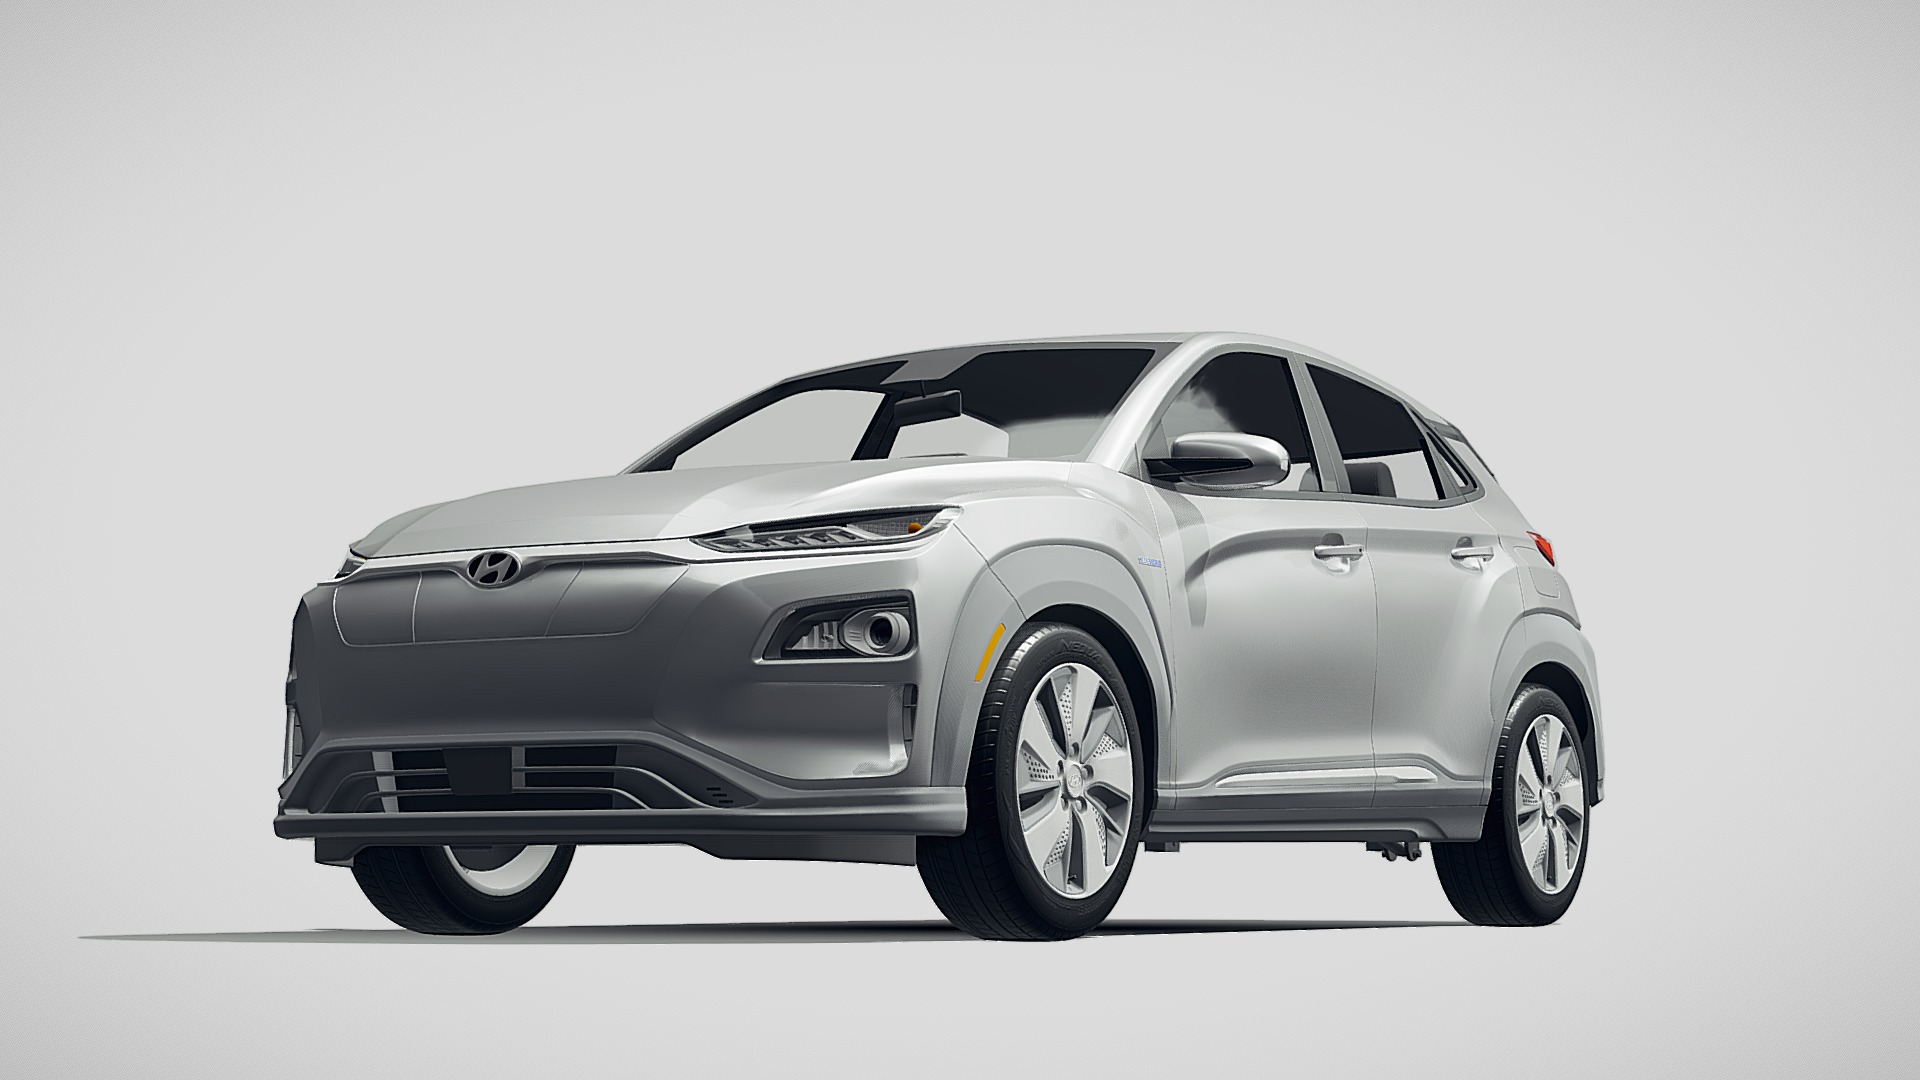 3D model Hyundai Kona Electric 2019 - This is a 3D model of the Hyundai Kona Electric 2019. The 3D model is about a silver car with a black top.